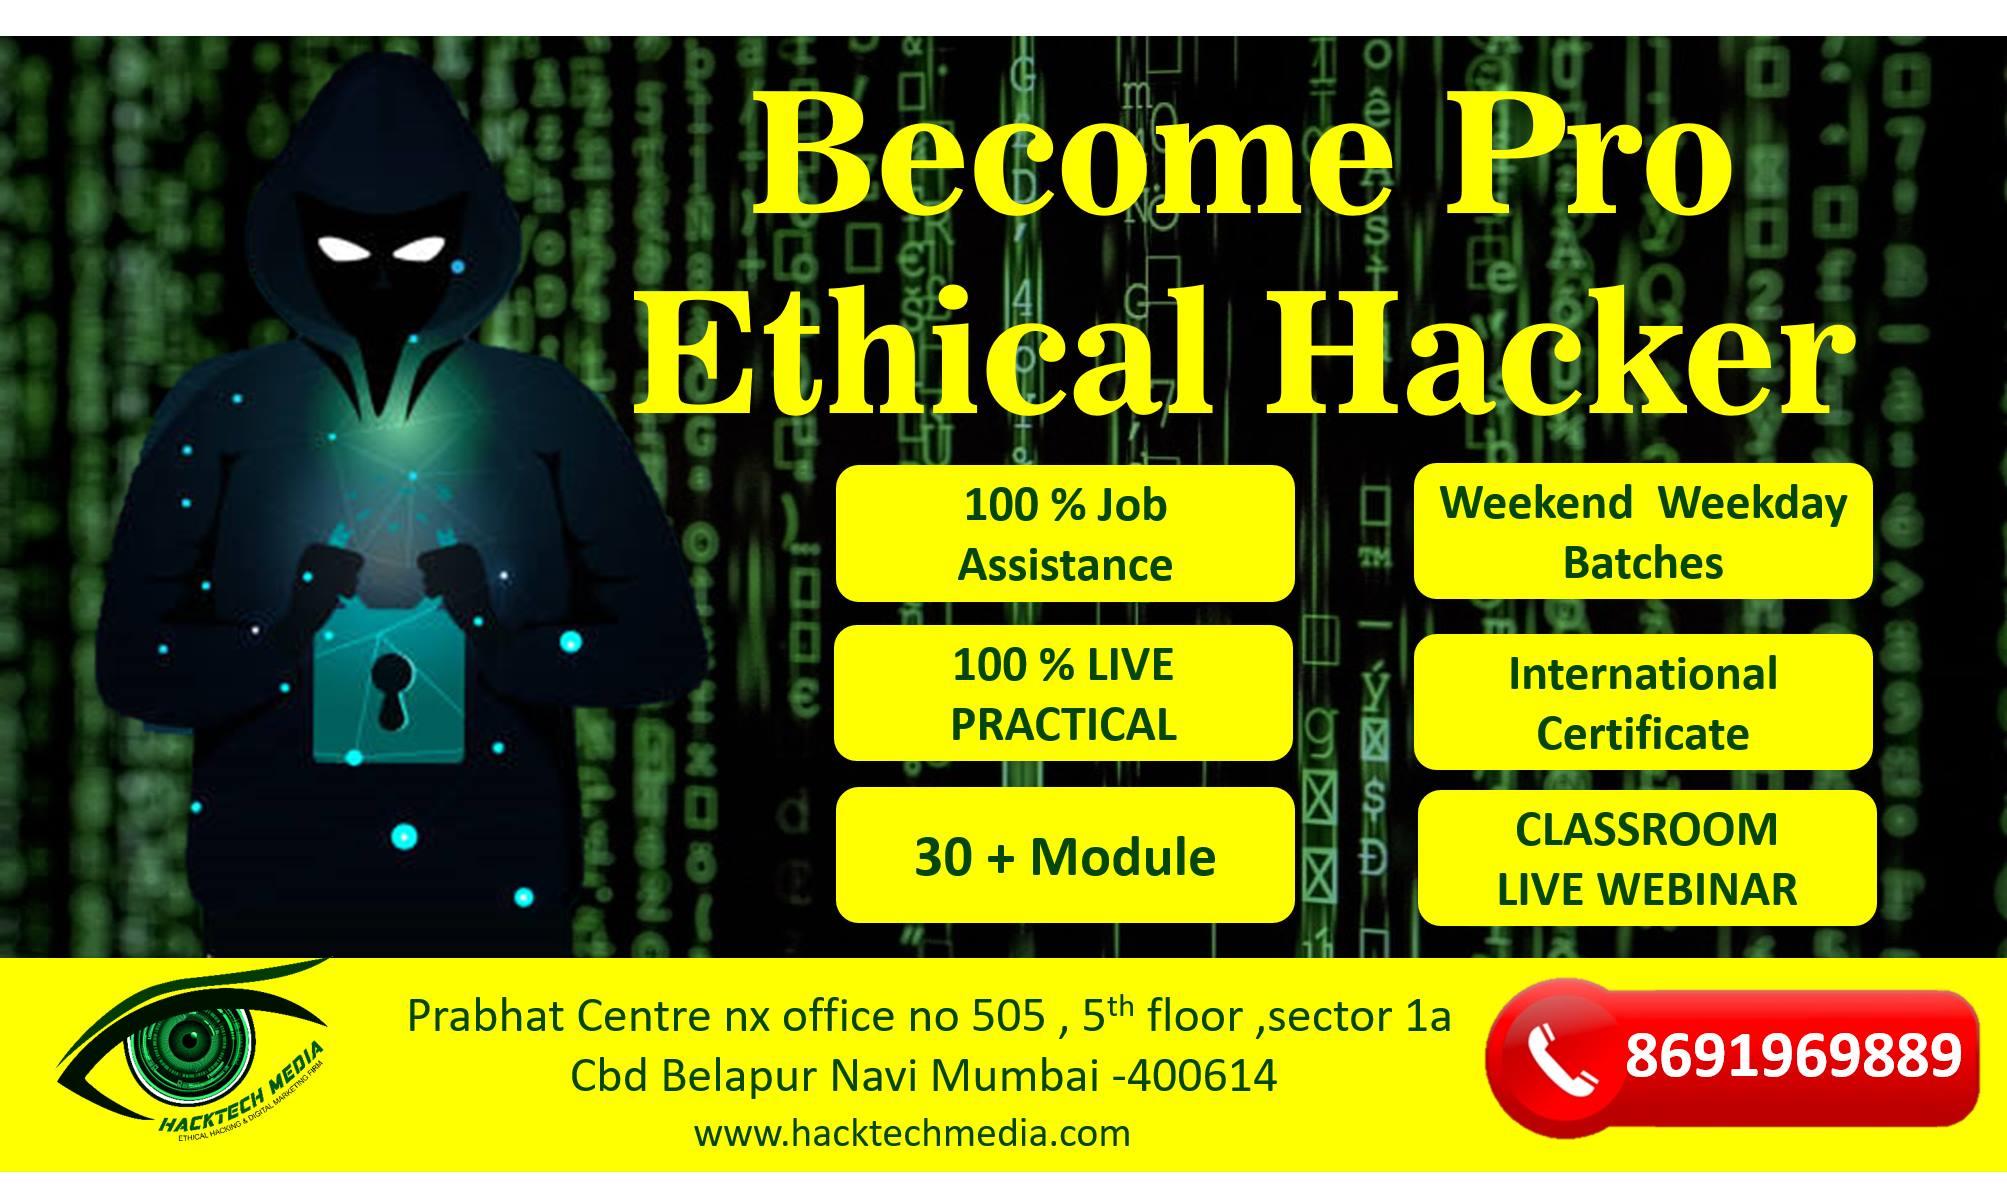 Government-approved Ethical hacking Course Become Certified Ethical hacker with Hacktechmedia